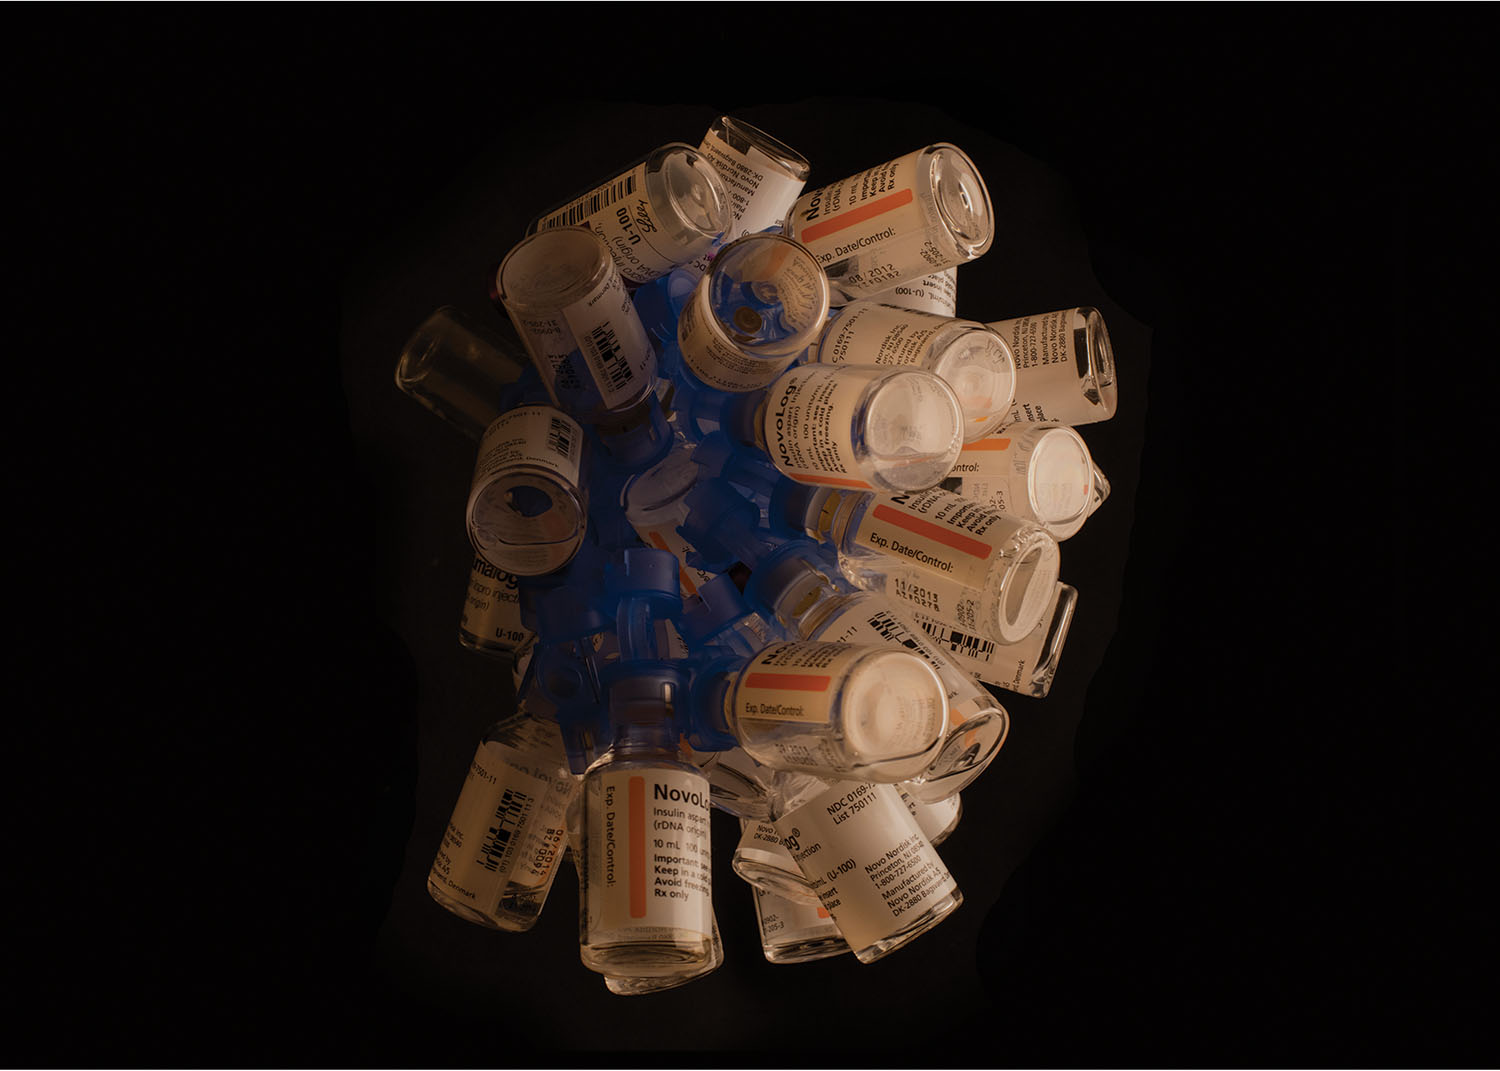 A collection of approximately six months’ worth of insulin bottles. This supply would have cost $3,000 ten years ago. Now it costs nearly $10,000. Photo by Stu Sherman.